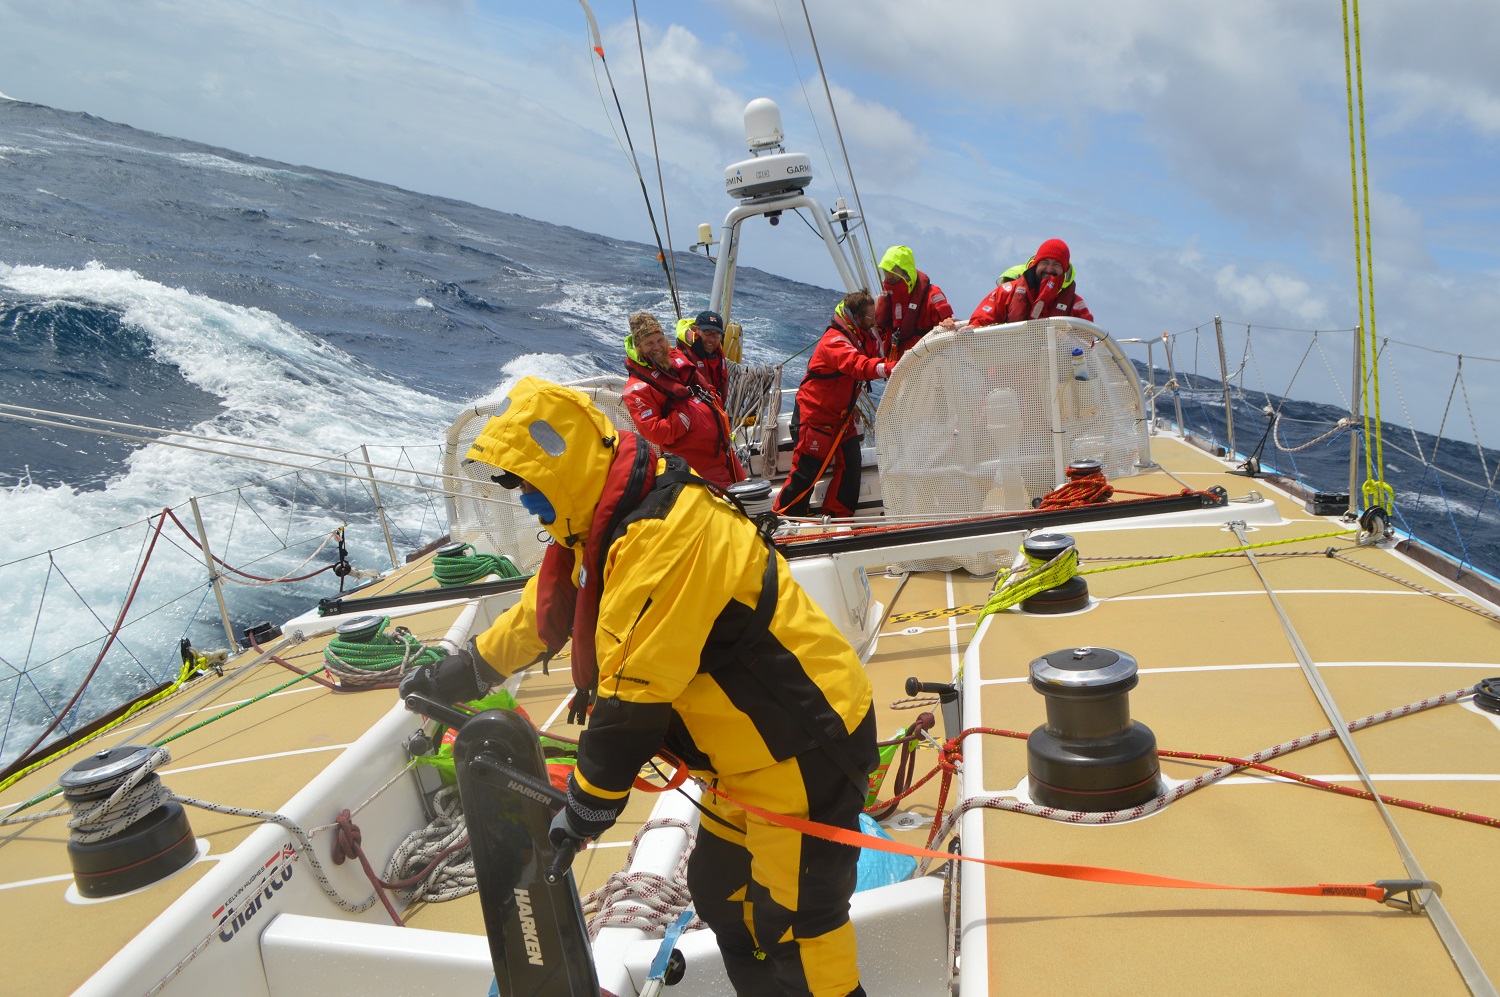 The crew of Unicef pictured working hard on board in mid Atlantic Ocean 